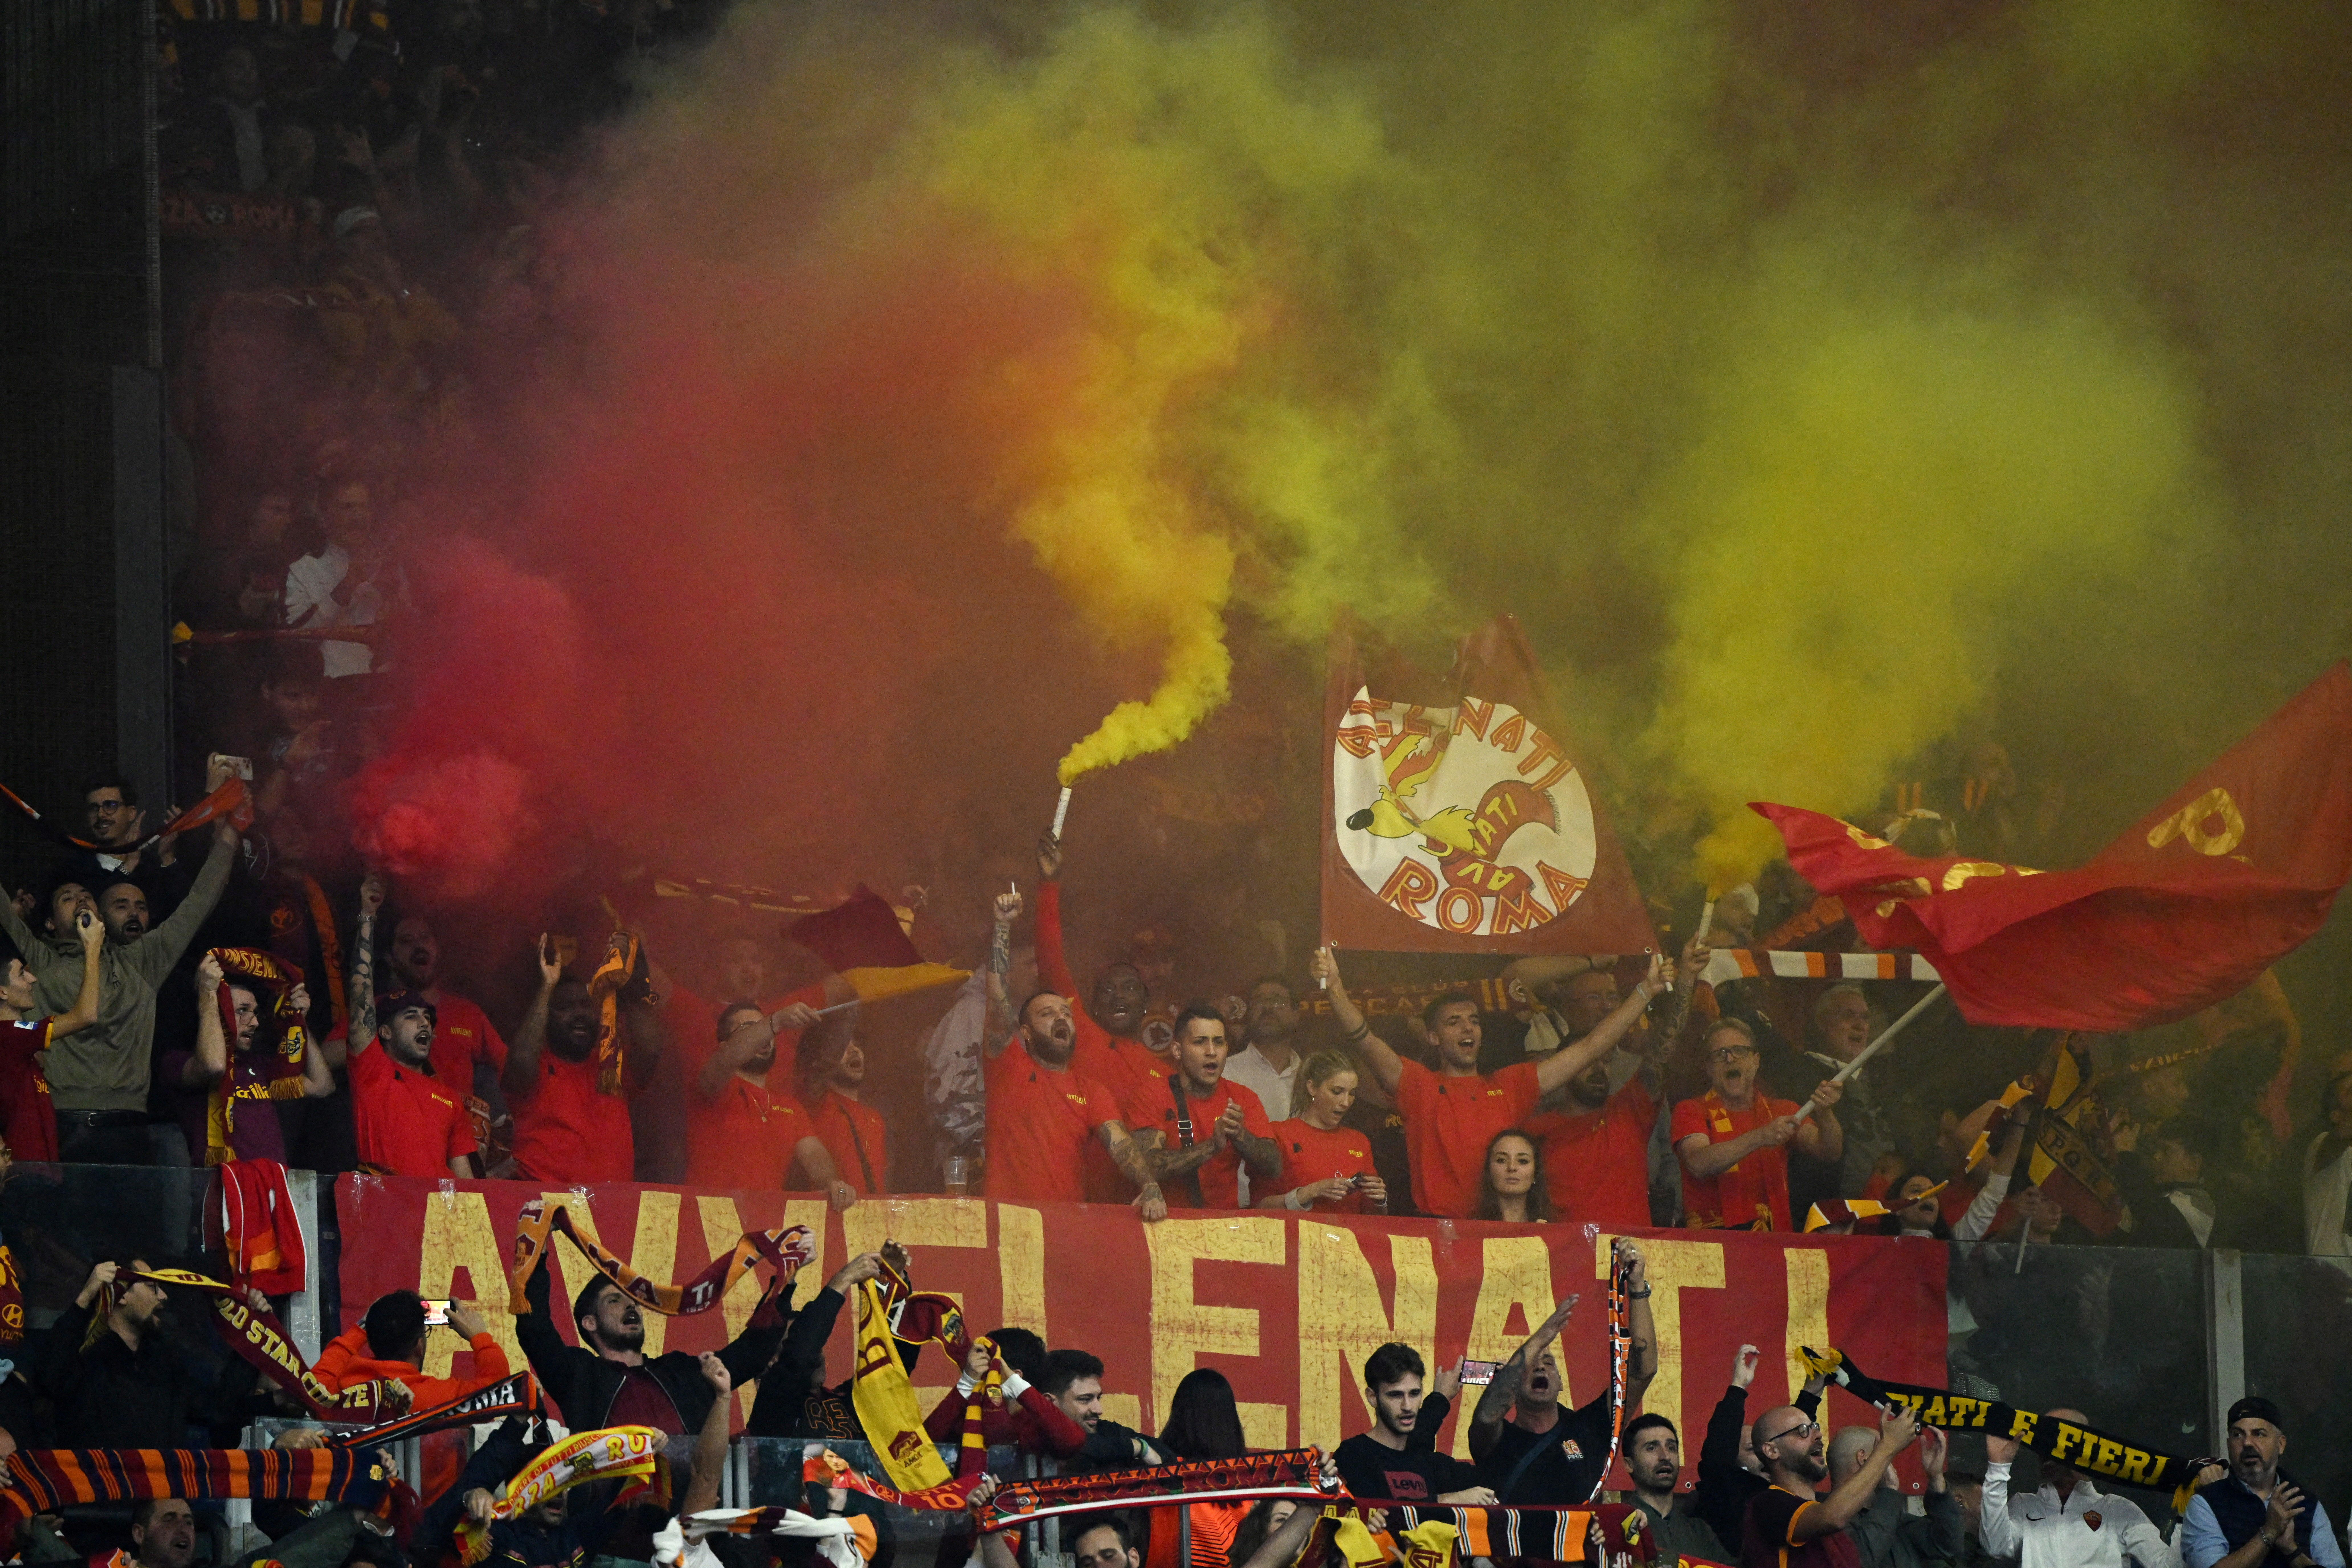 Roma ultras stand up for Slavia Prague fans after ban - Football Italia